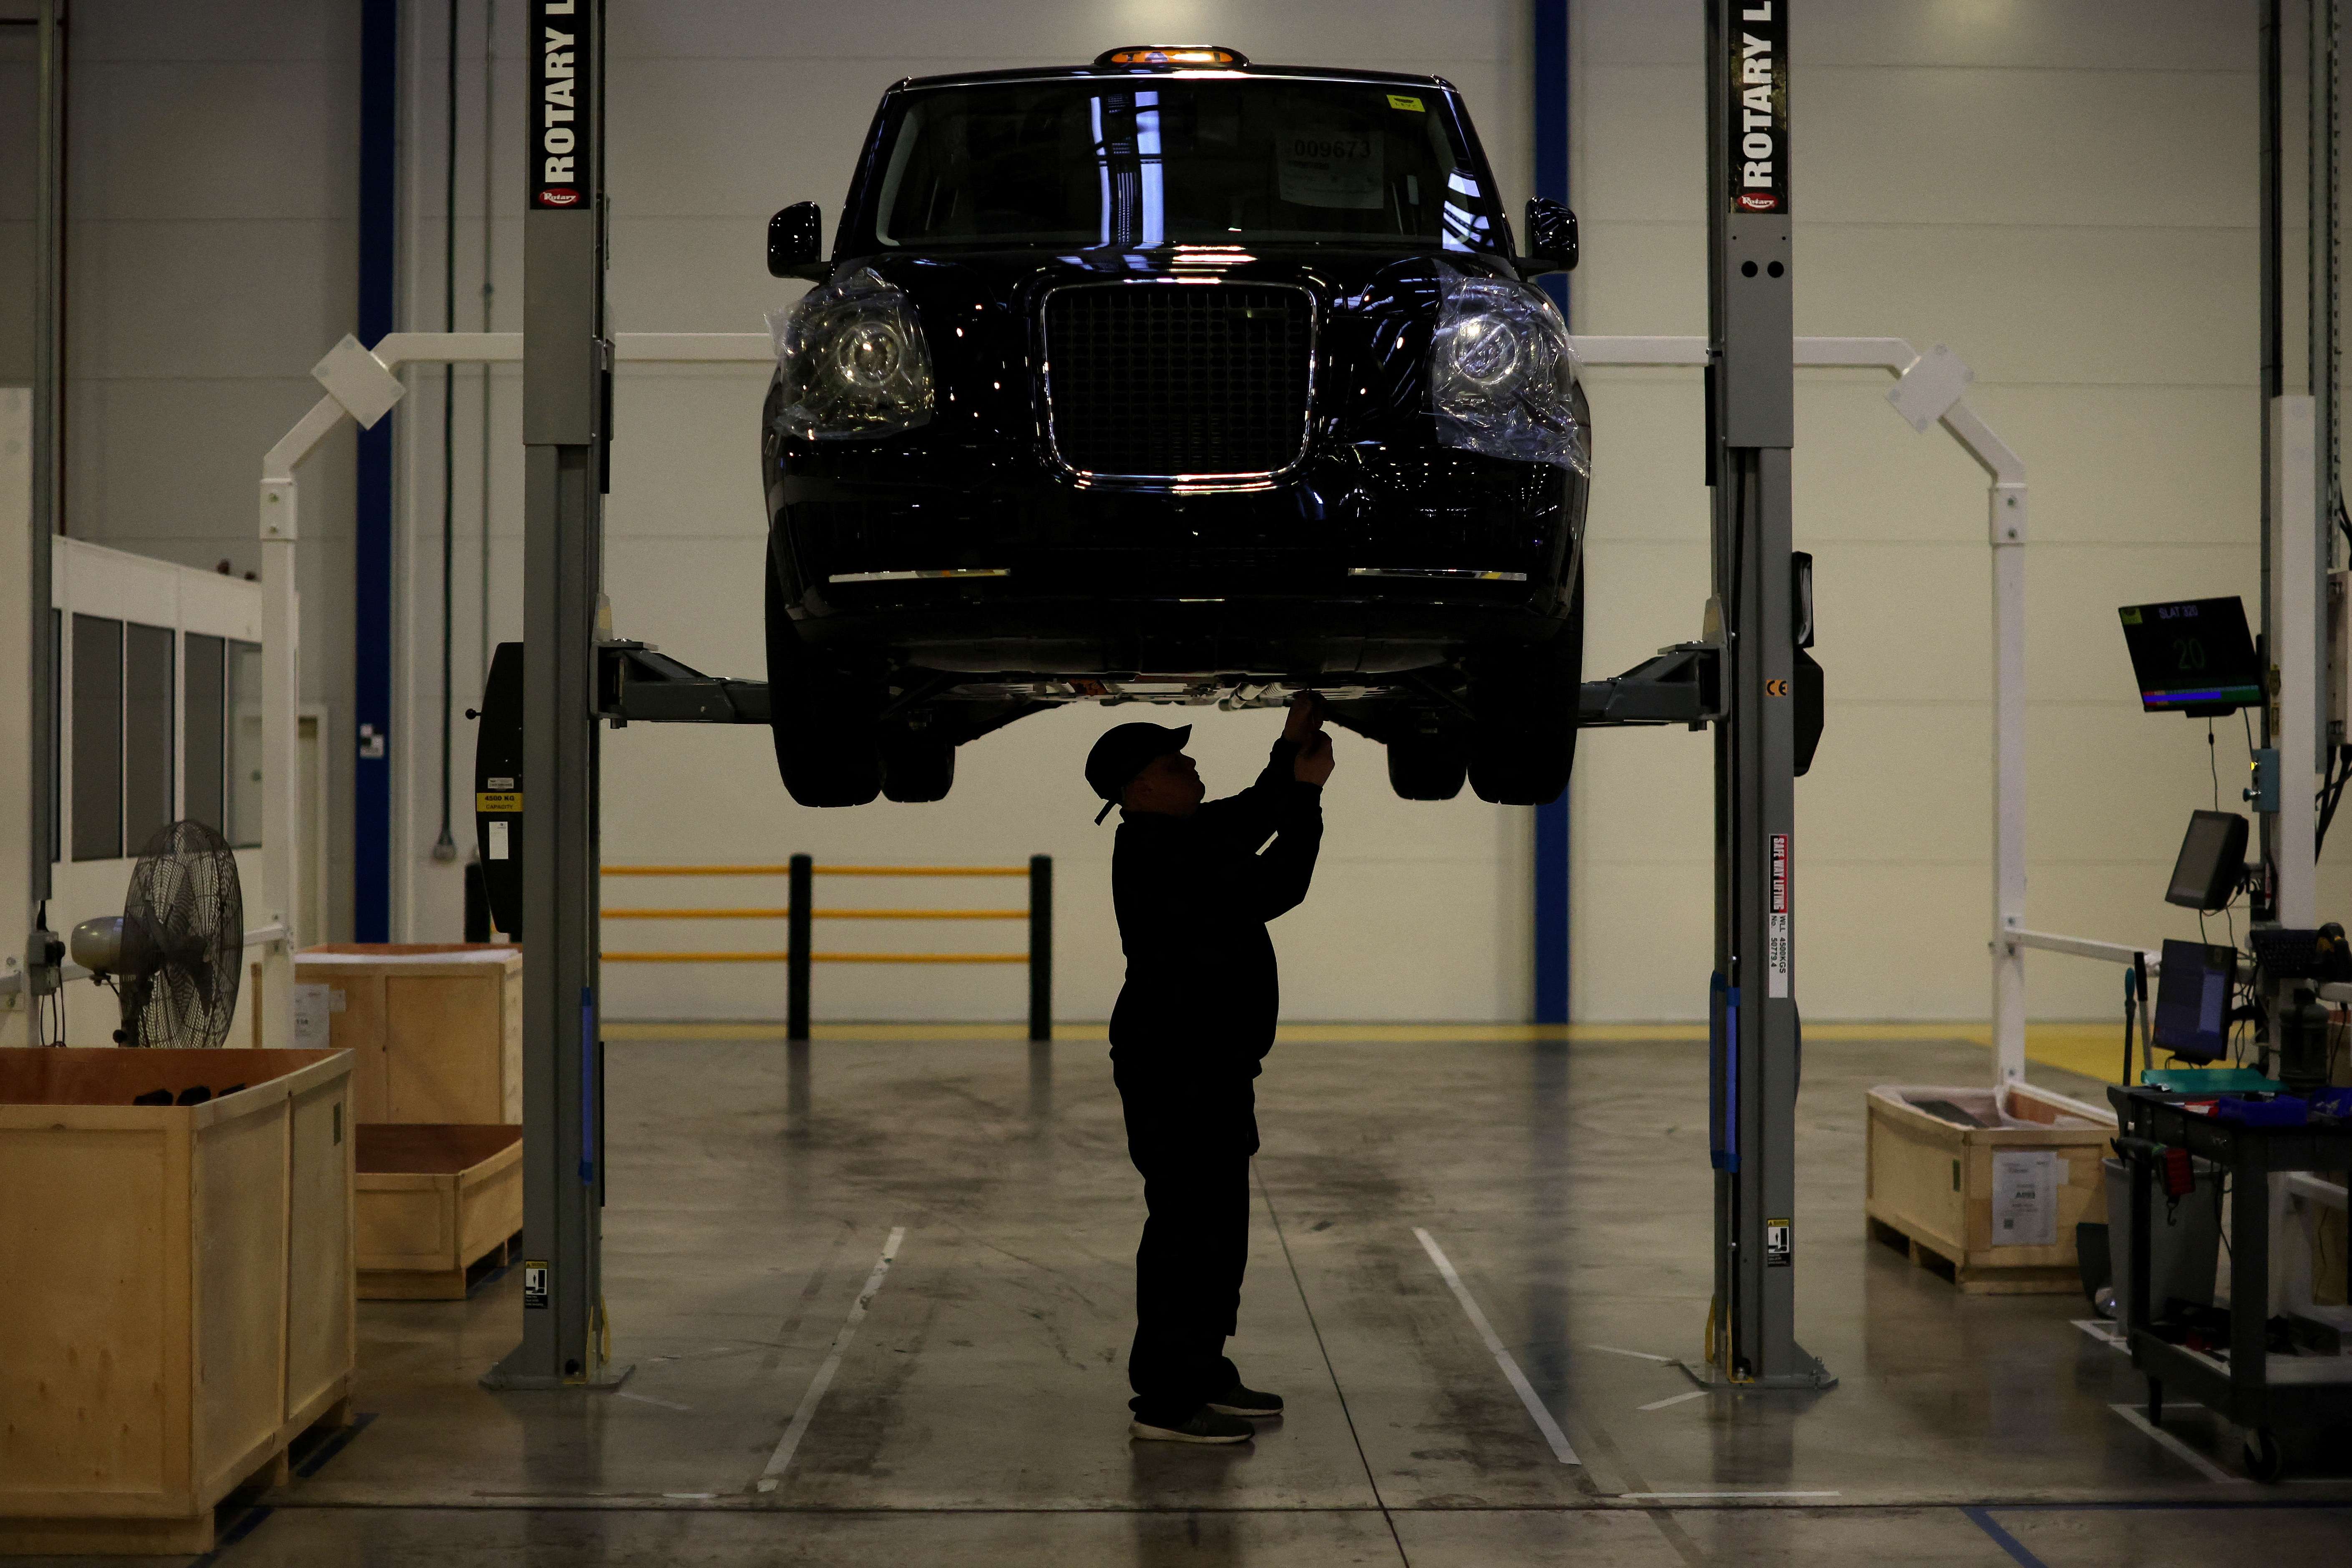 A worker stands beneath a Texas Electric taxi inside the LEVC (London Electric Vehicle Company) factory in Coventry